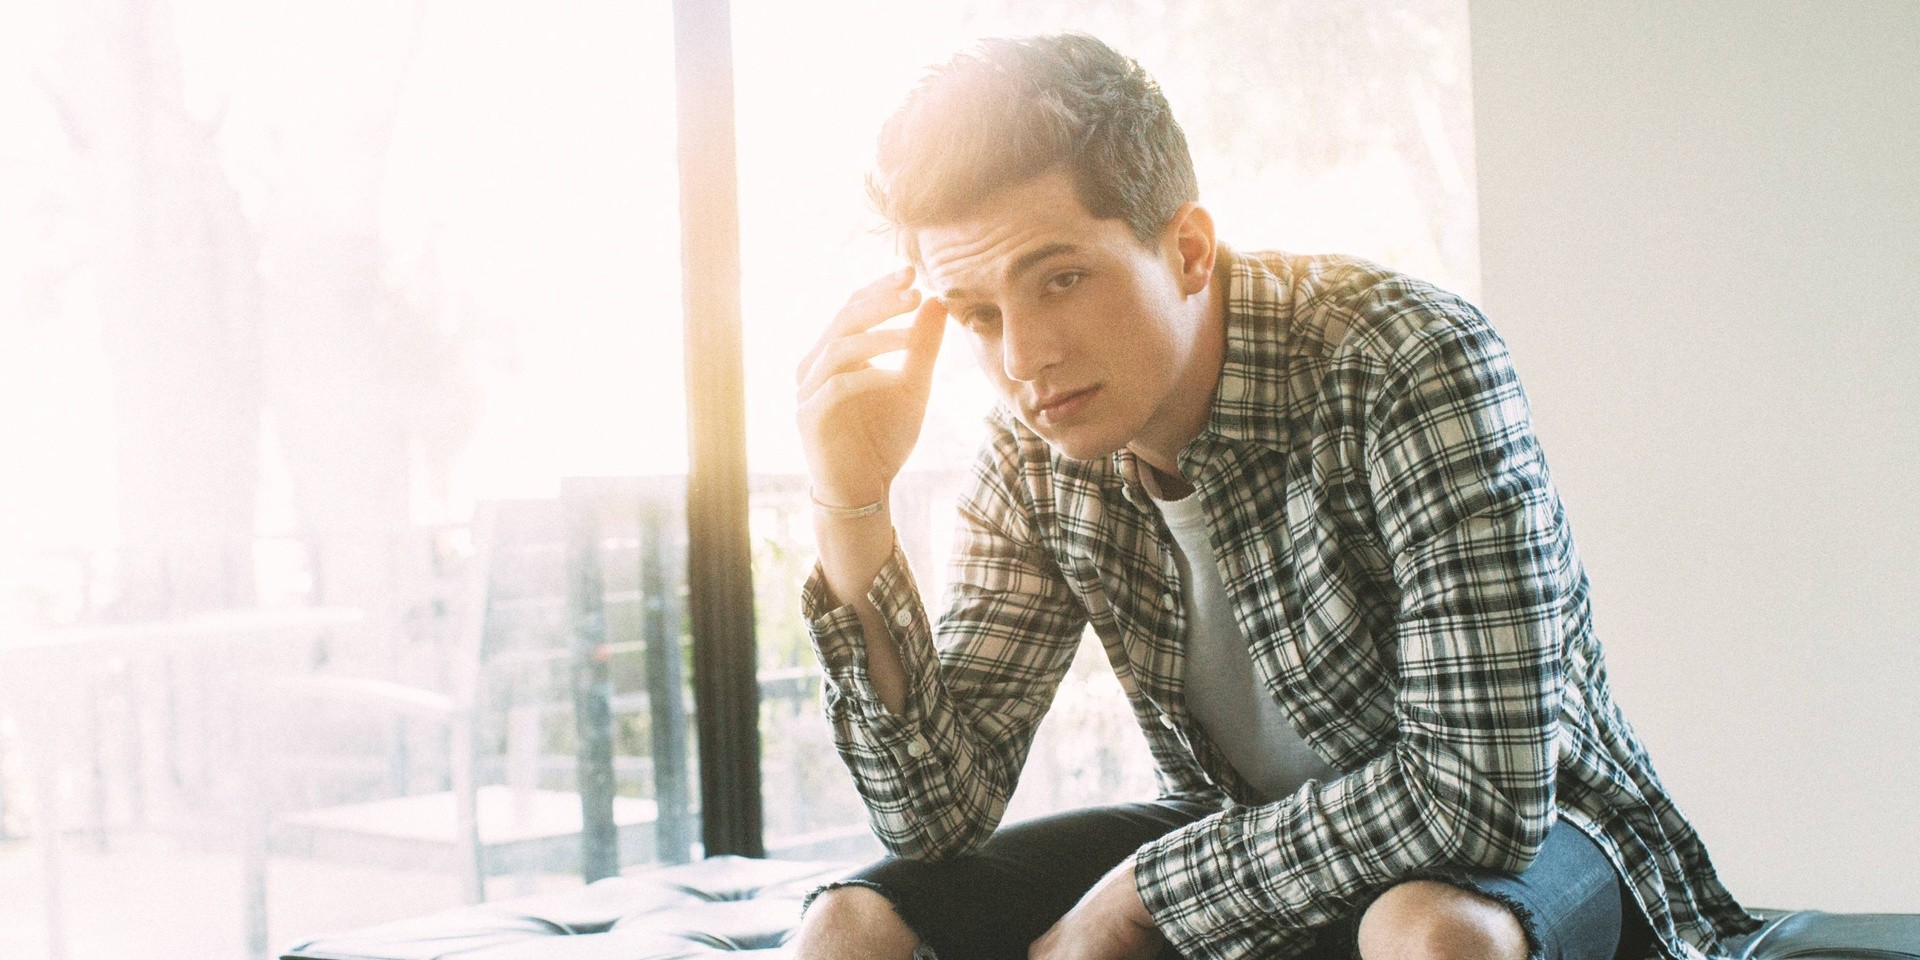 Charlie Puth, the songwriting workhorse who's taking over pop music